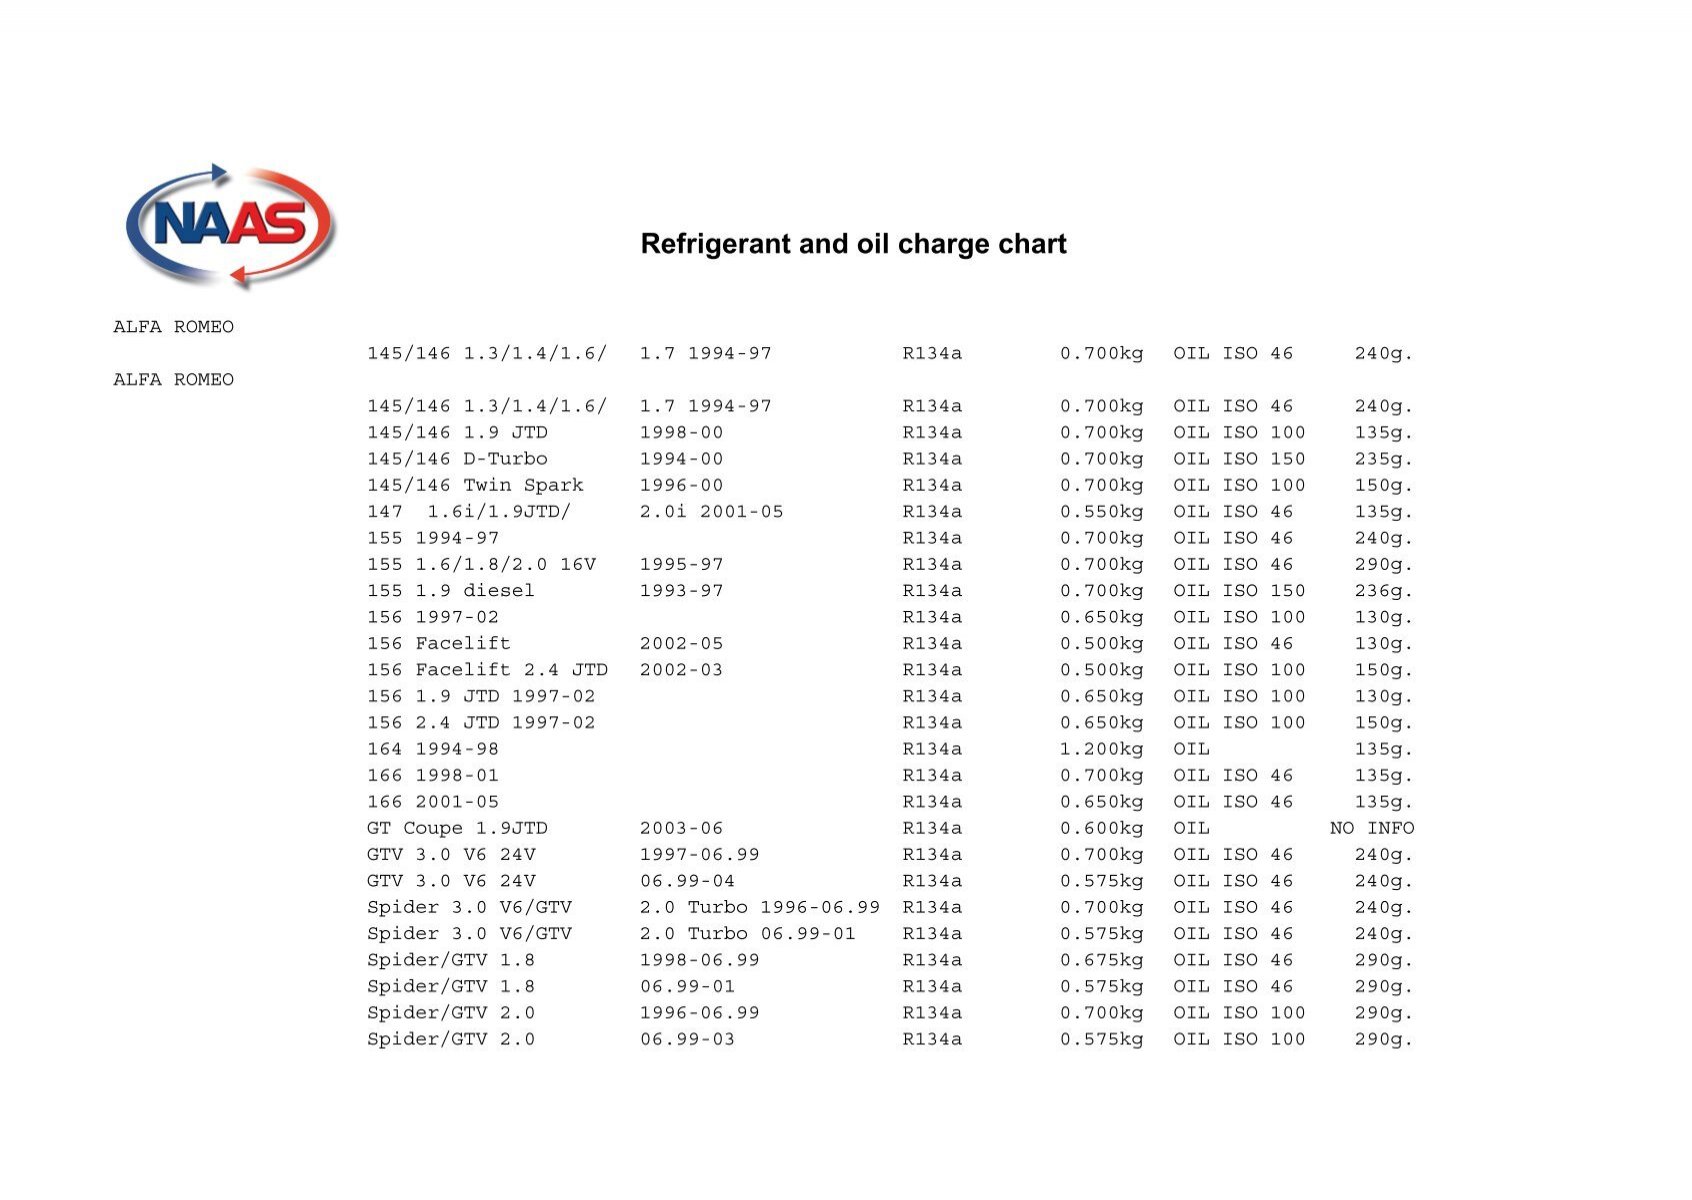 Refrigerant and oil charge chart - Naas